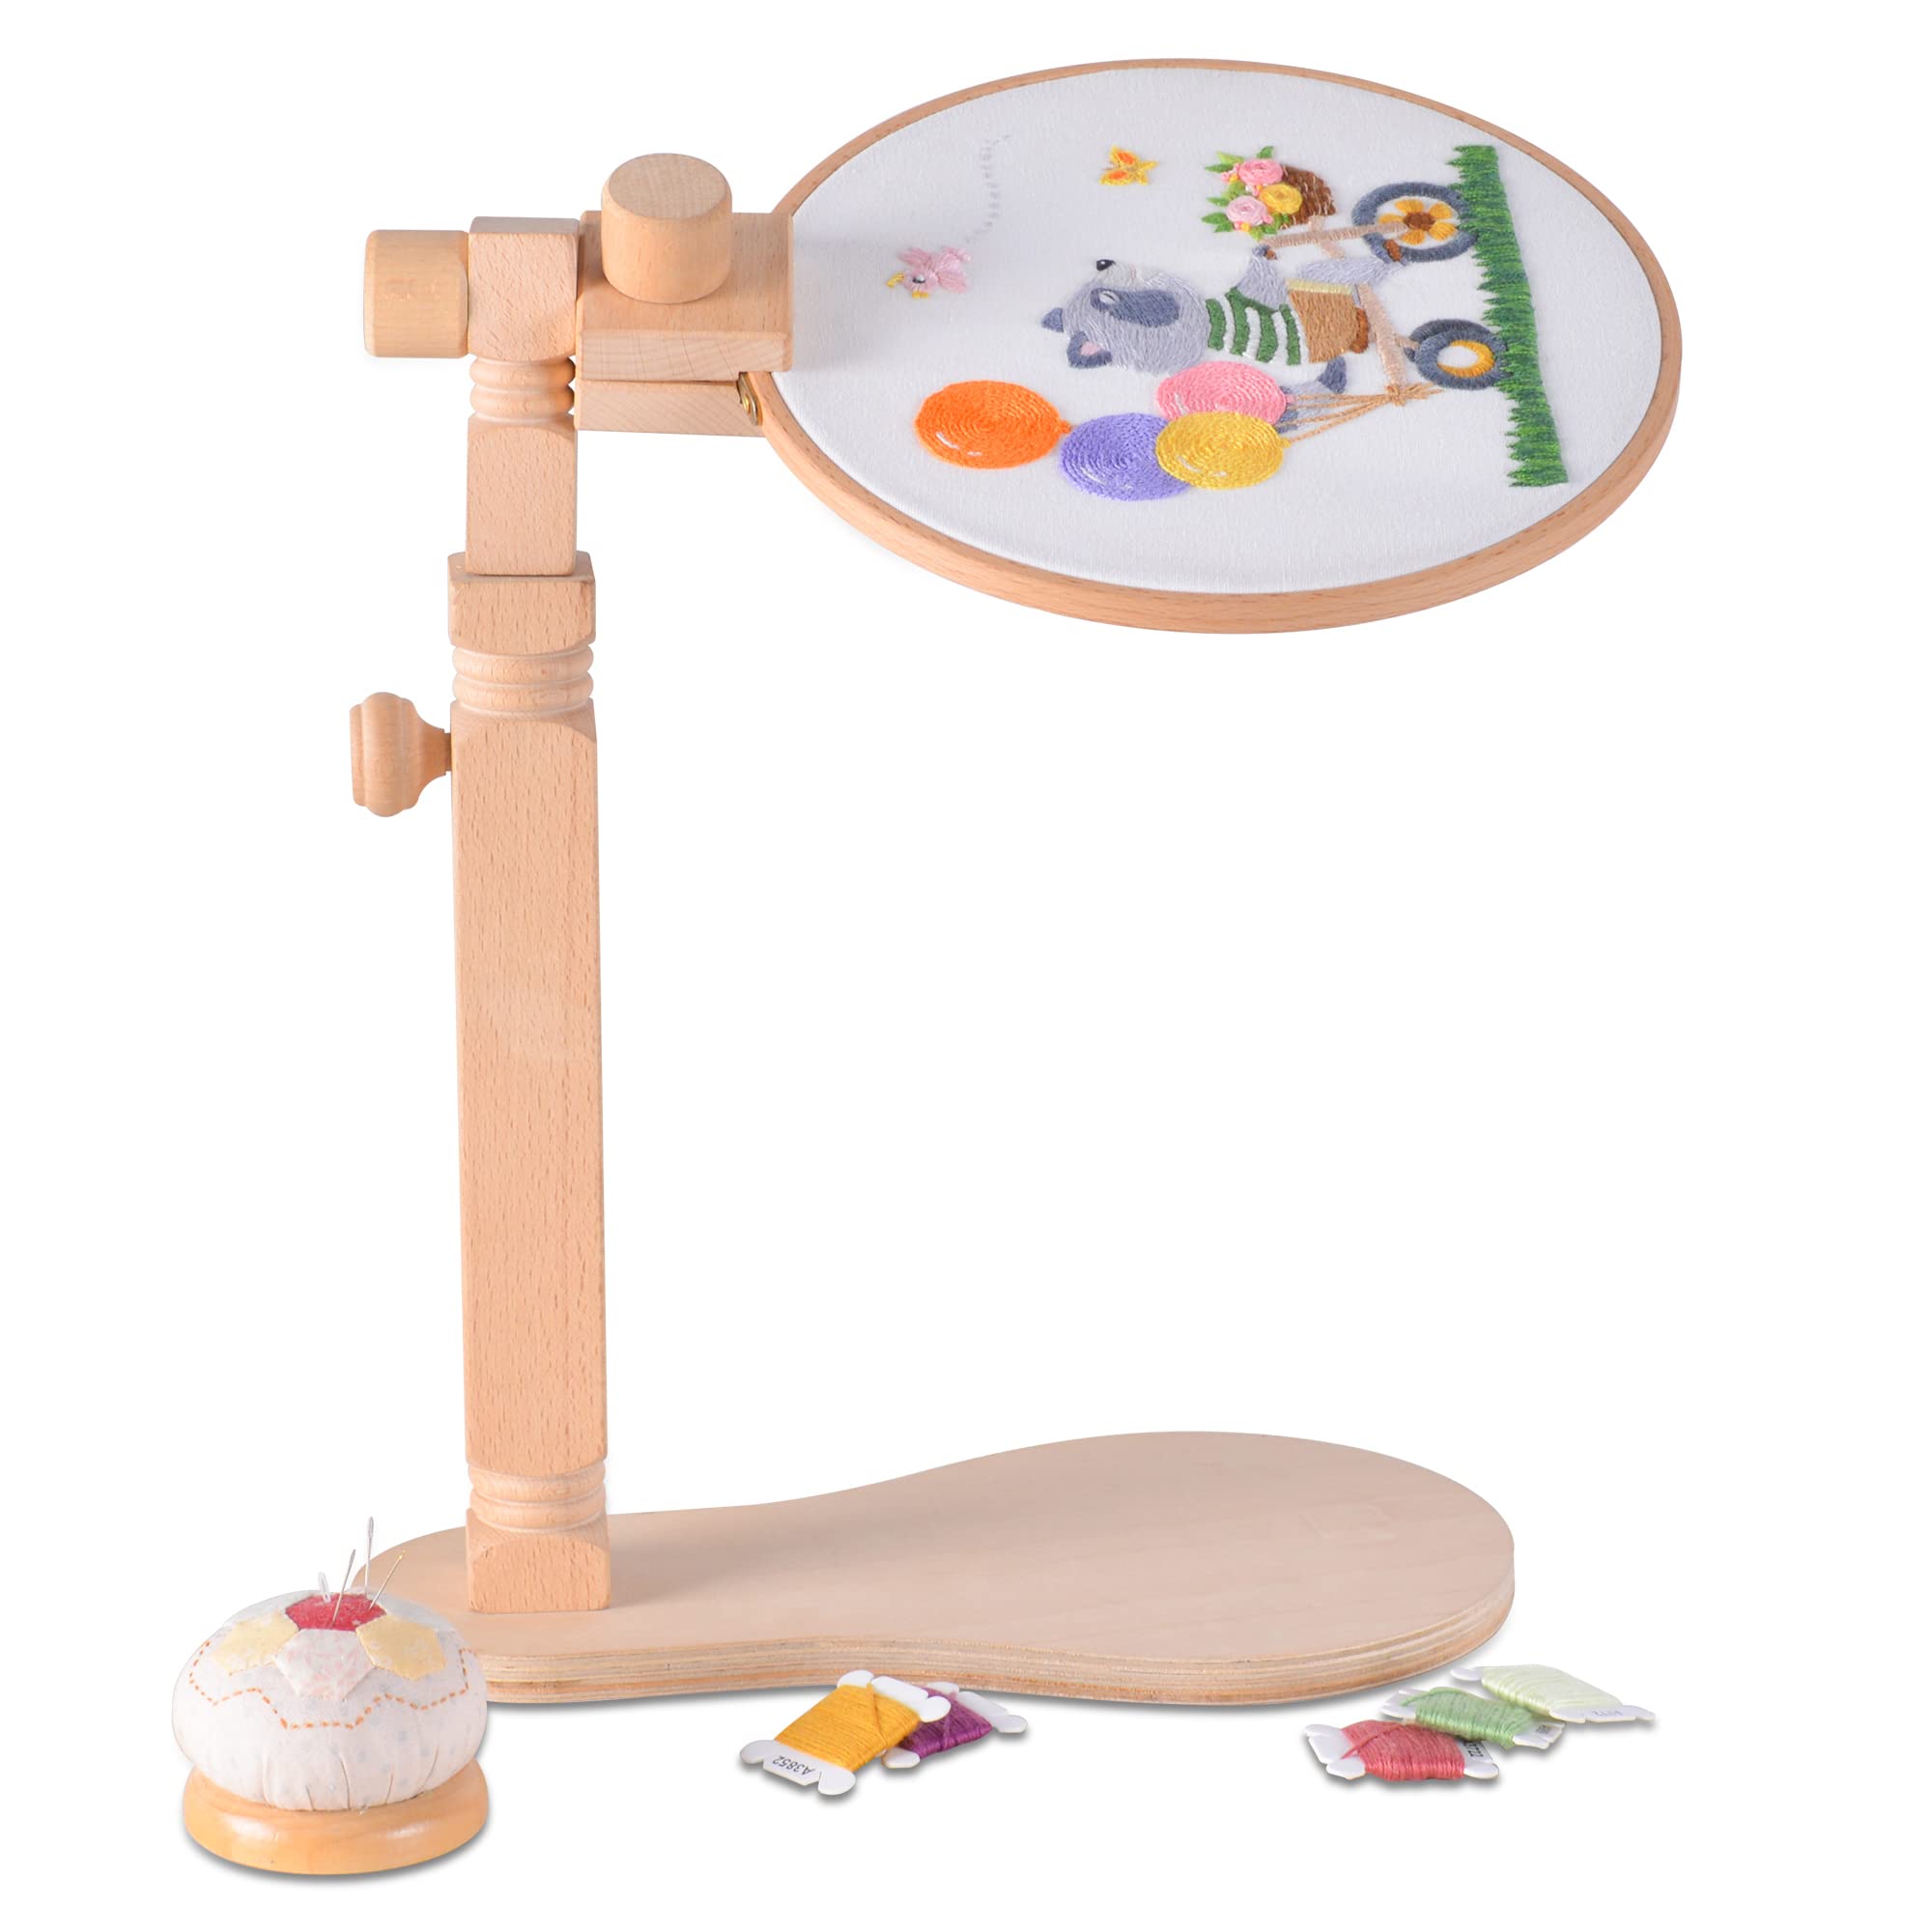 Embroidery Stand, Adjustable Cross Stitch Hoop Holder, Hands Free